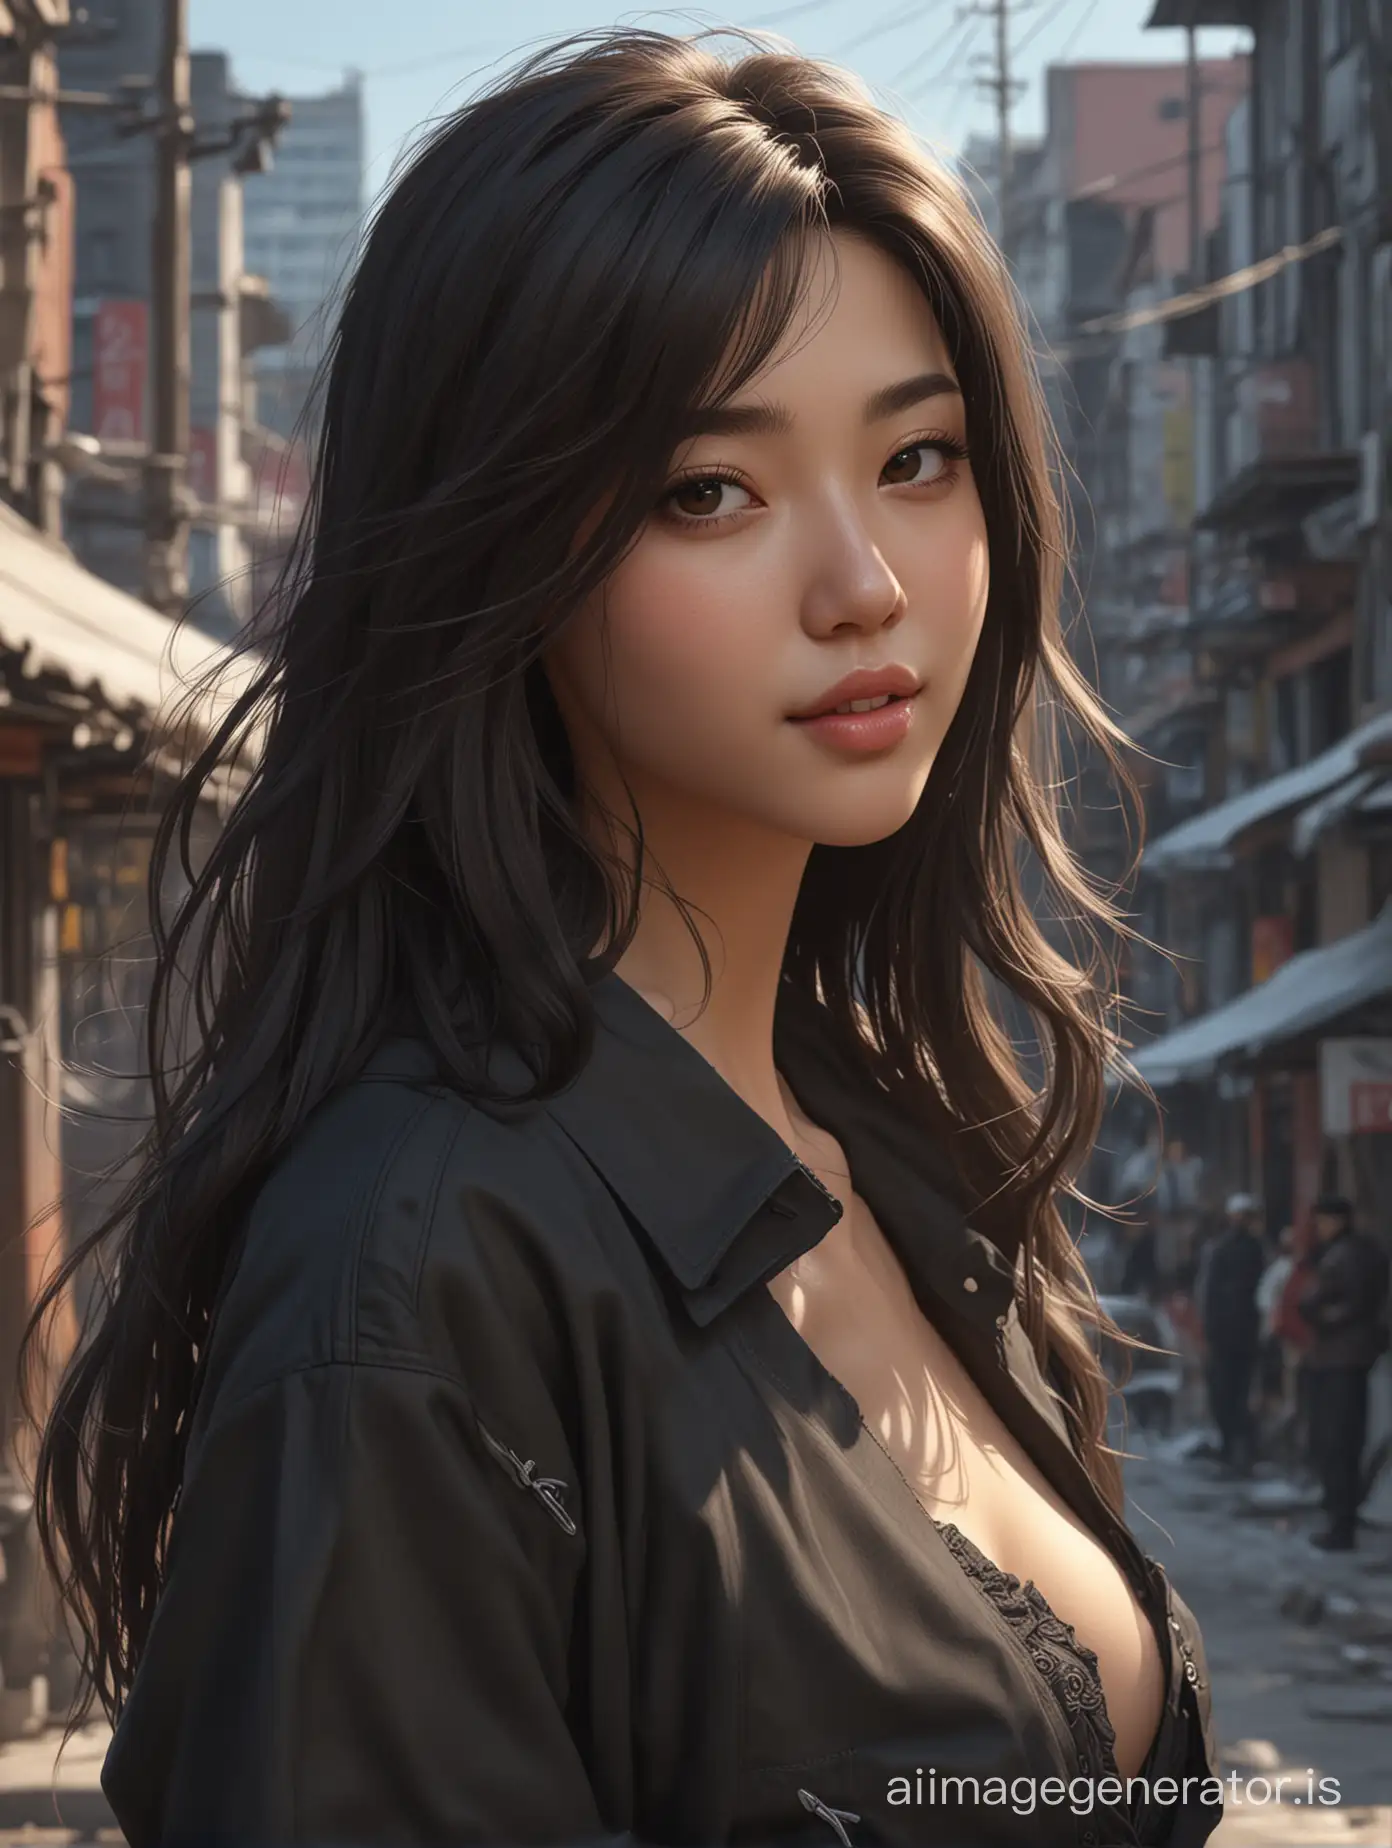 Sweet sexy girl high detail, featuring a perfect strong  fullbody and a beautiful, realistically detailed face. She is wearing black old clothes, with long hair, striking a sexy pose in a side view against a city background. She is smiling at the camera, captured in a highly detailed and realistic rendering. Digital painting style with cinematic lighting, by top artists in the industry such as Kim Jung Gi, and Yuumei, artstation feature. 4k resolution, whimsical, detailed shading, character design